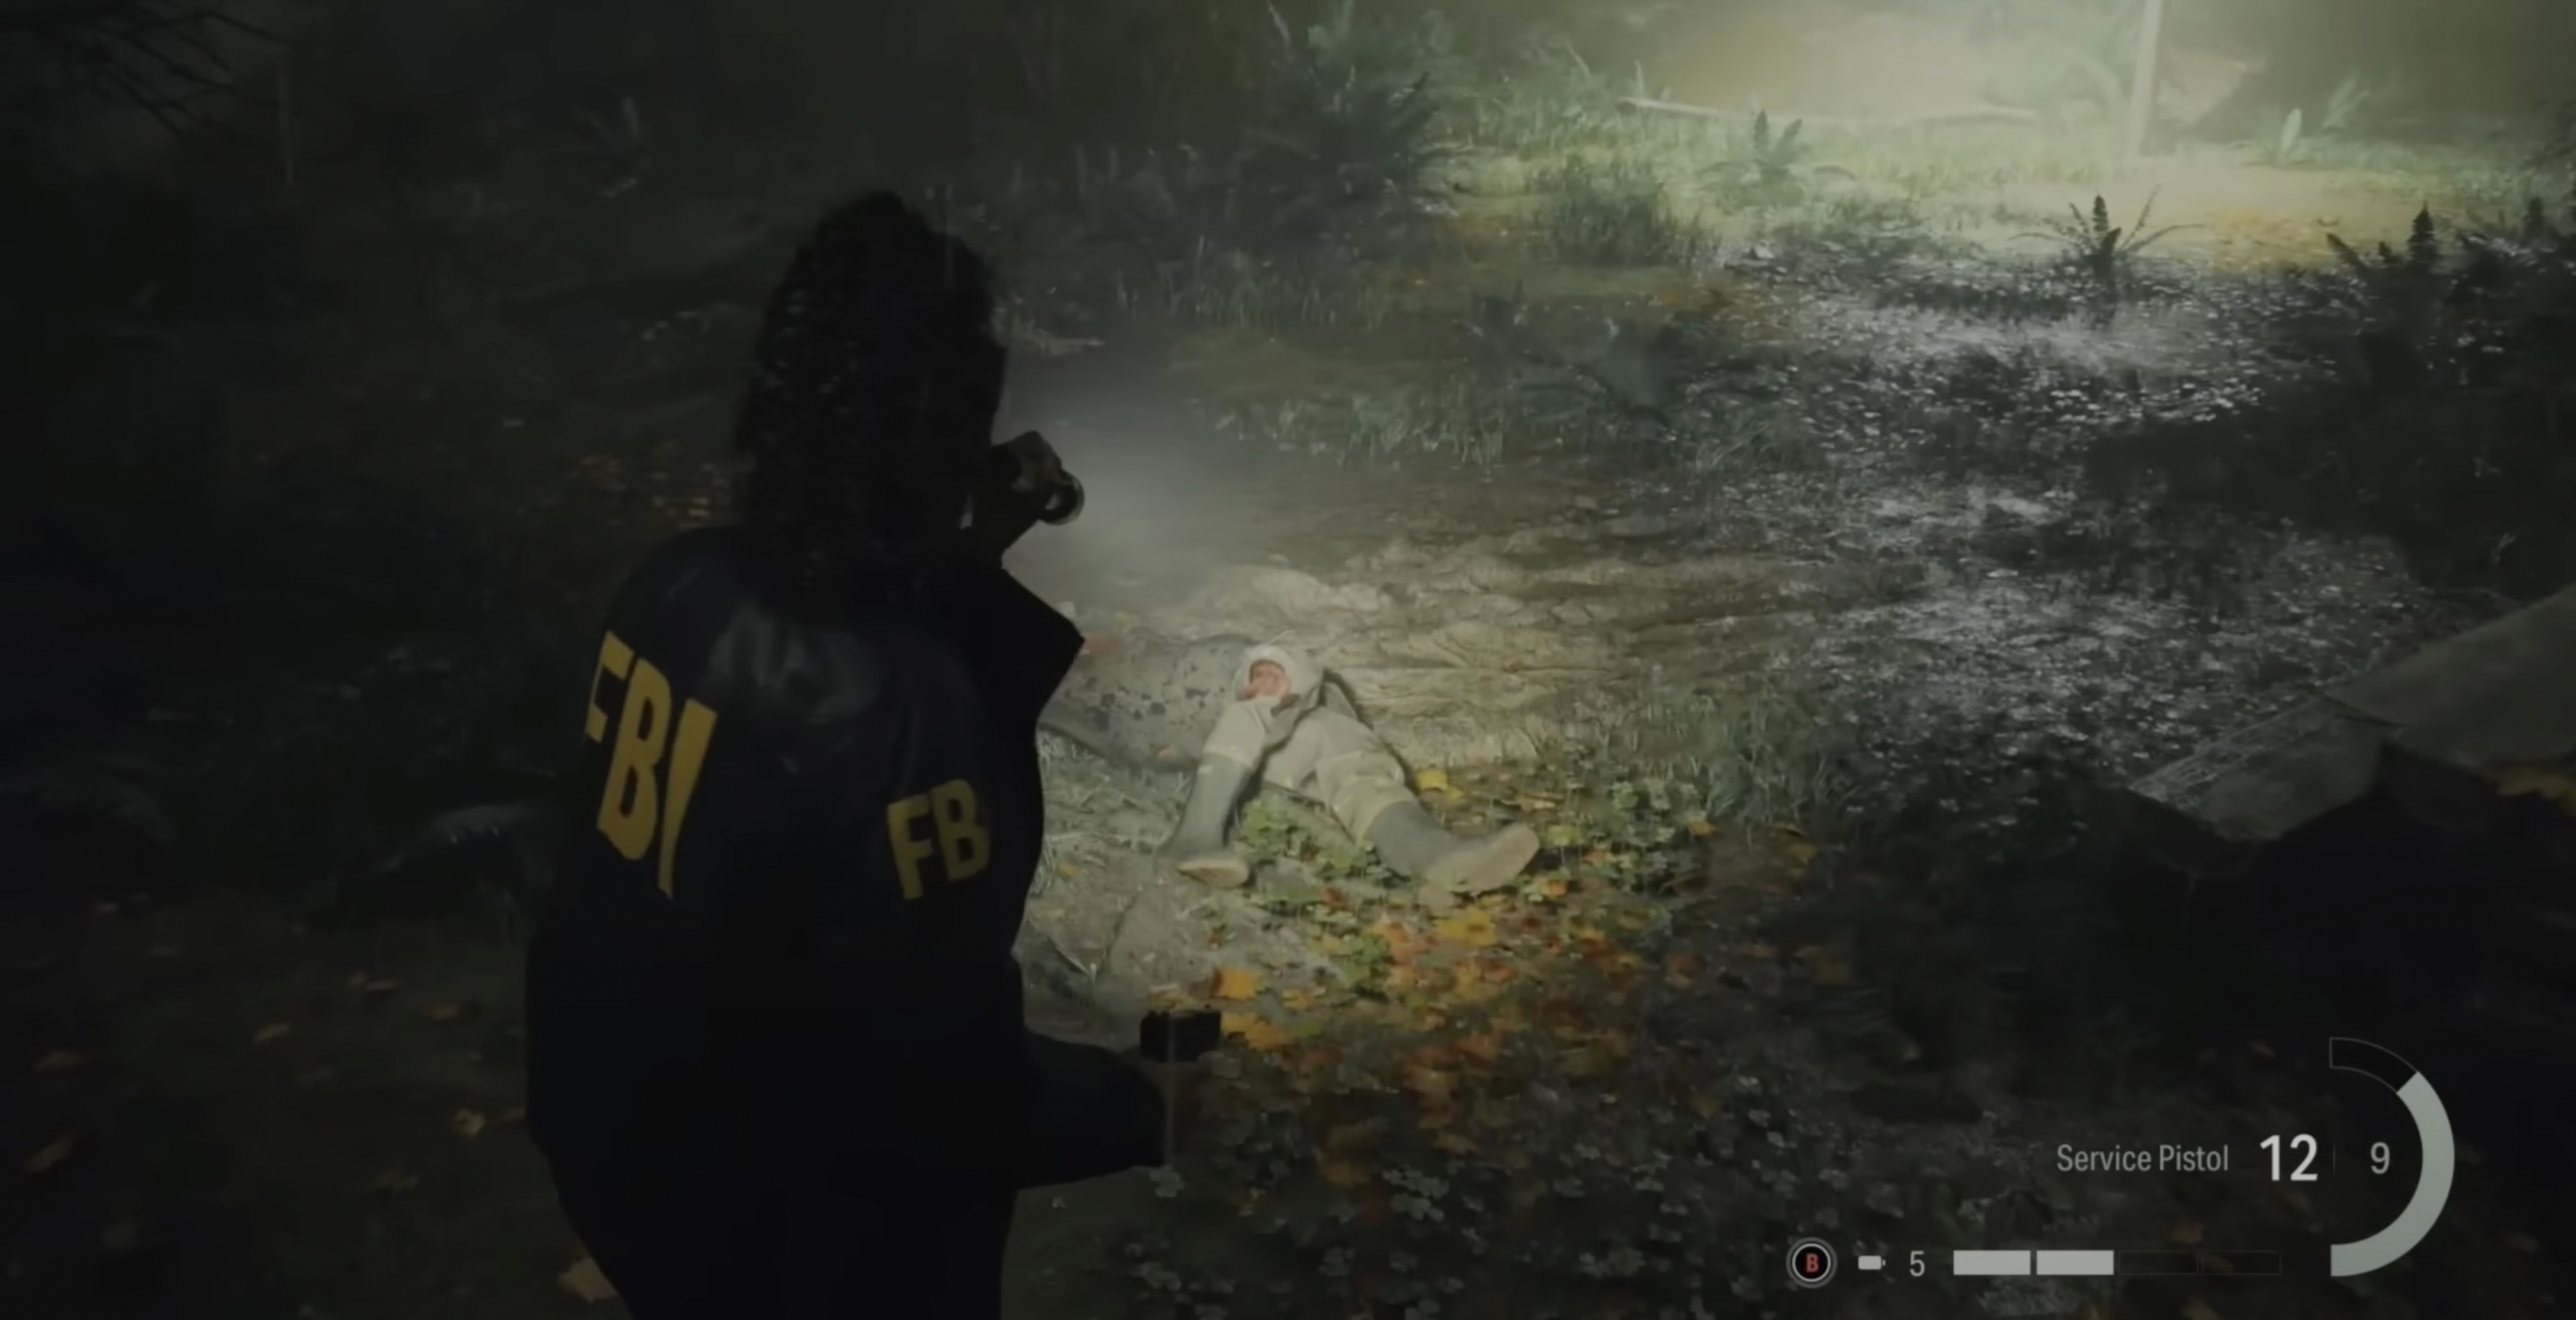 VGC] Alan Wake 2 is now 'playable from start to finish', Remedy